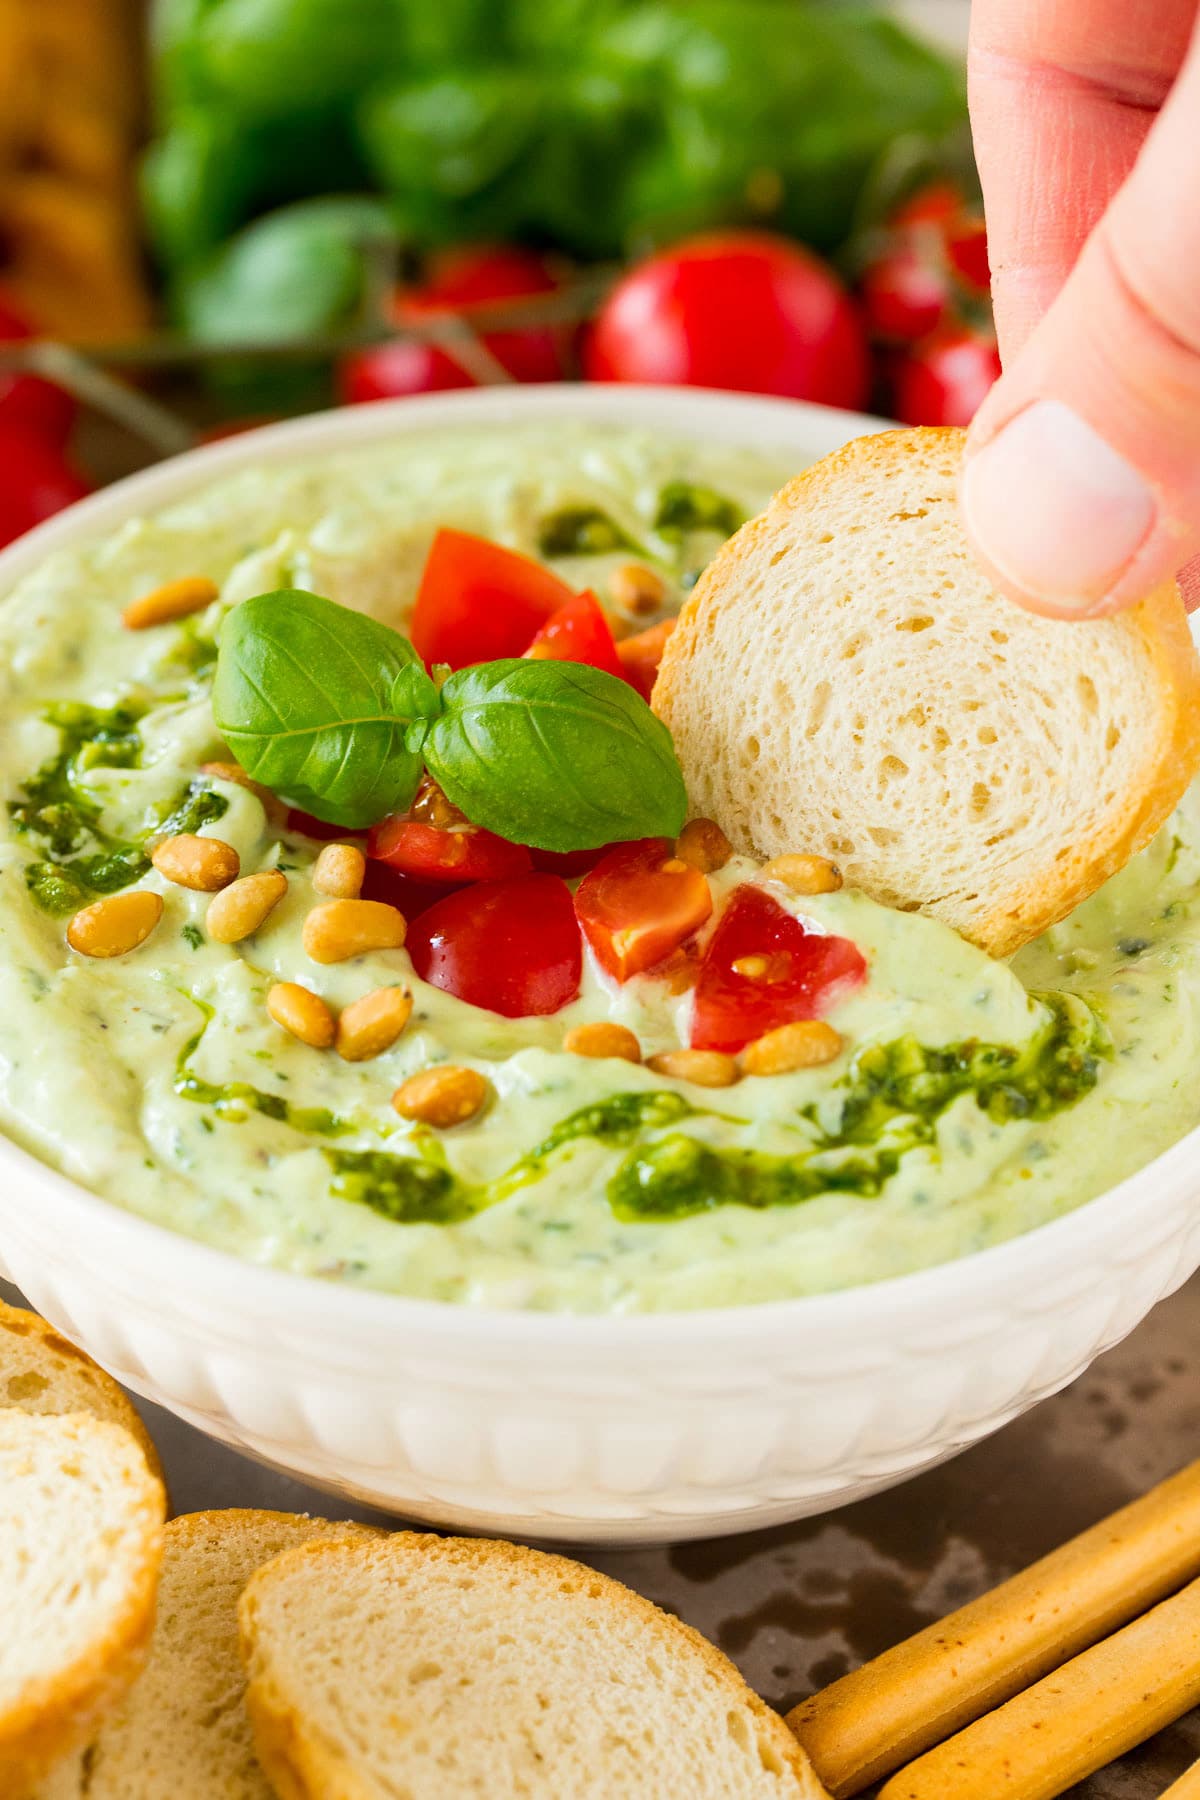 A hand using bread to scoop up pesto dip.